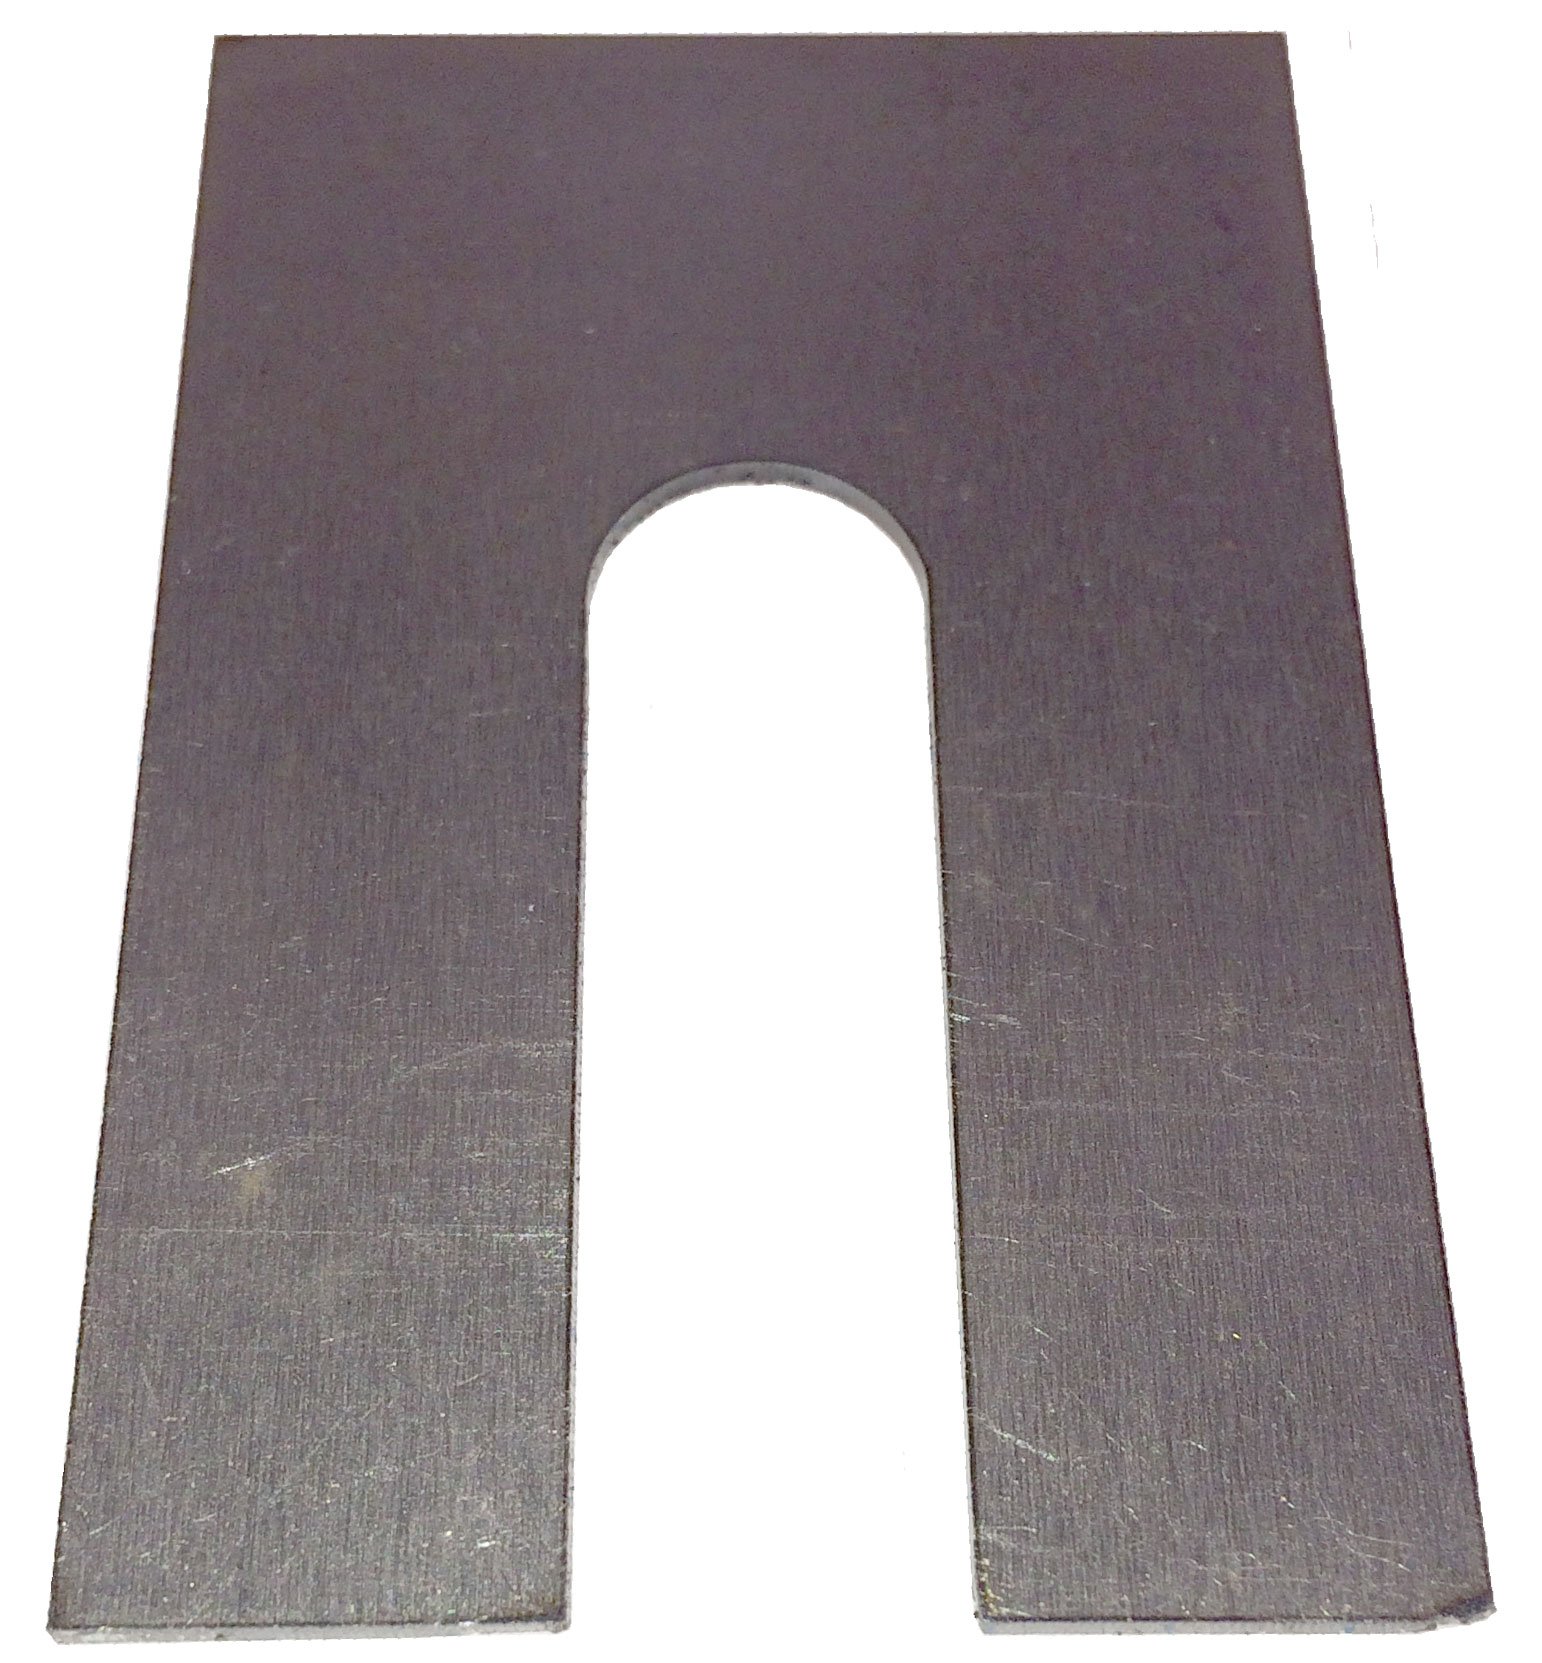 152-3-x-1-16-Slotted-Steel-Shim